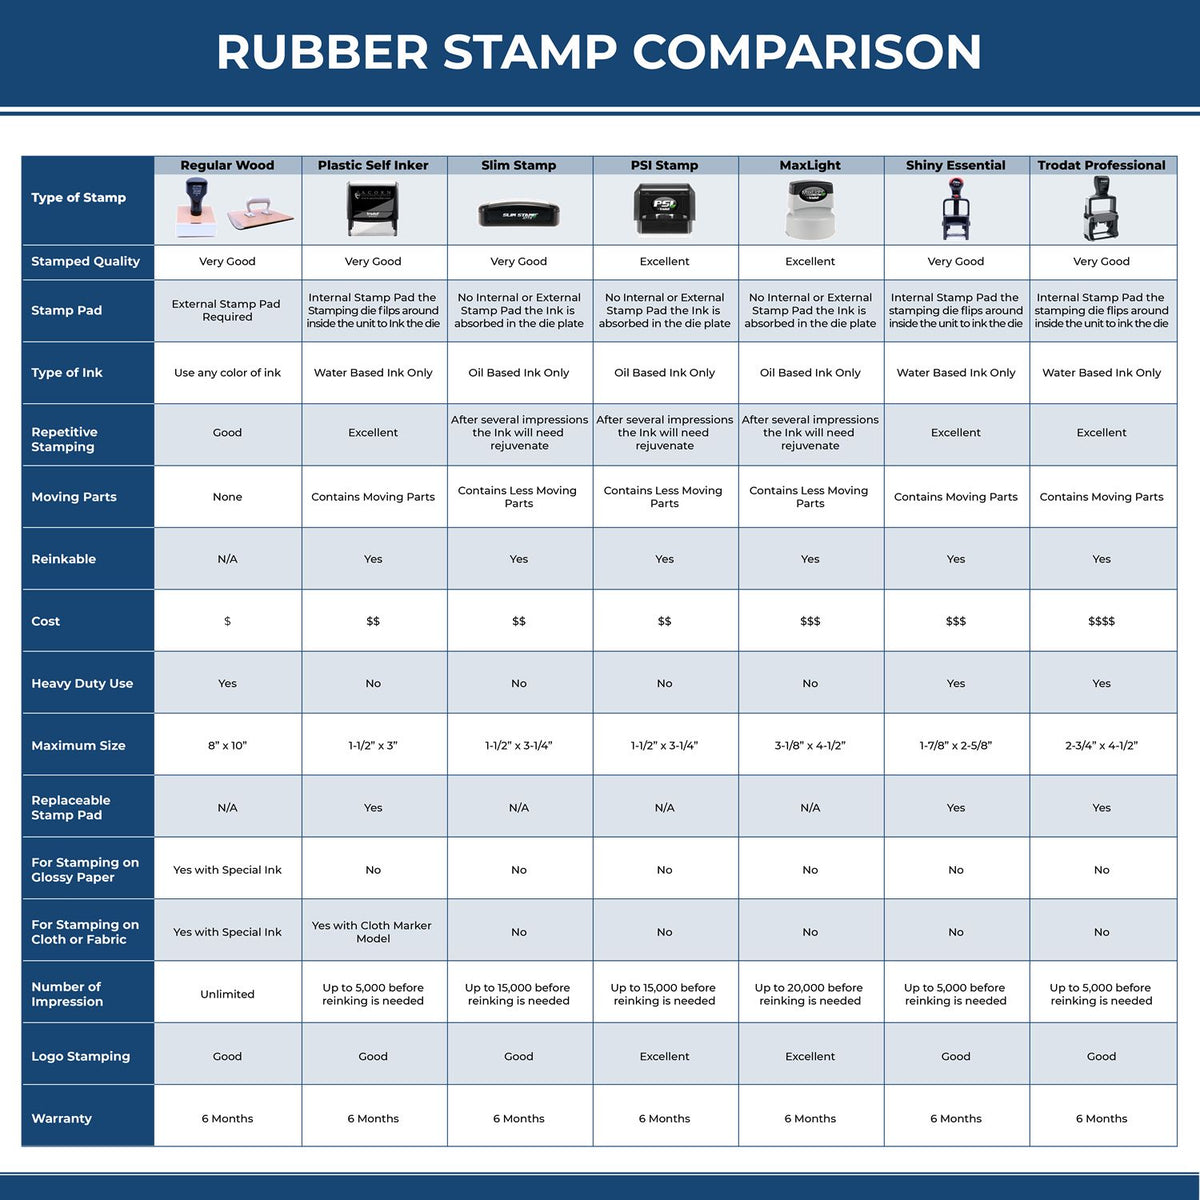 For Official Use Only Rubber Stamp 4403R Rubber Stamp Comparison